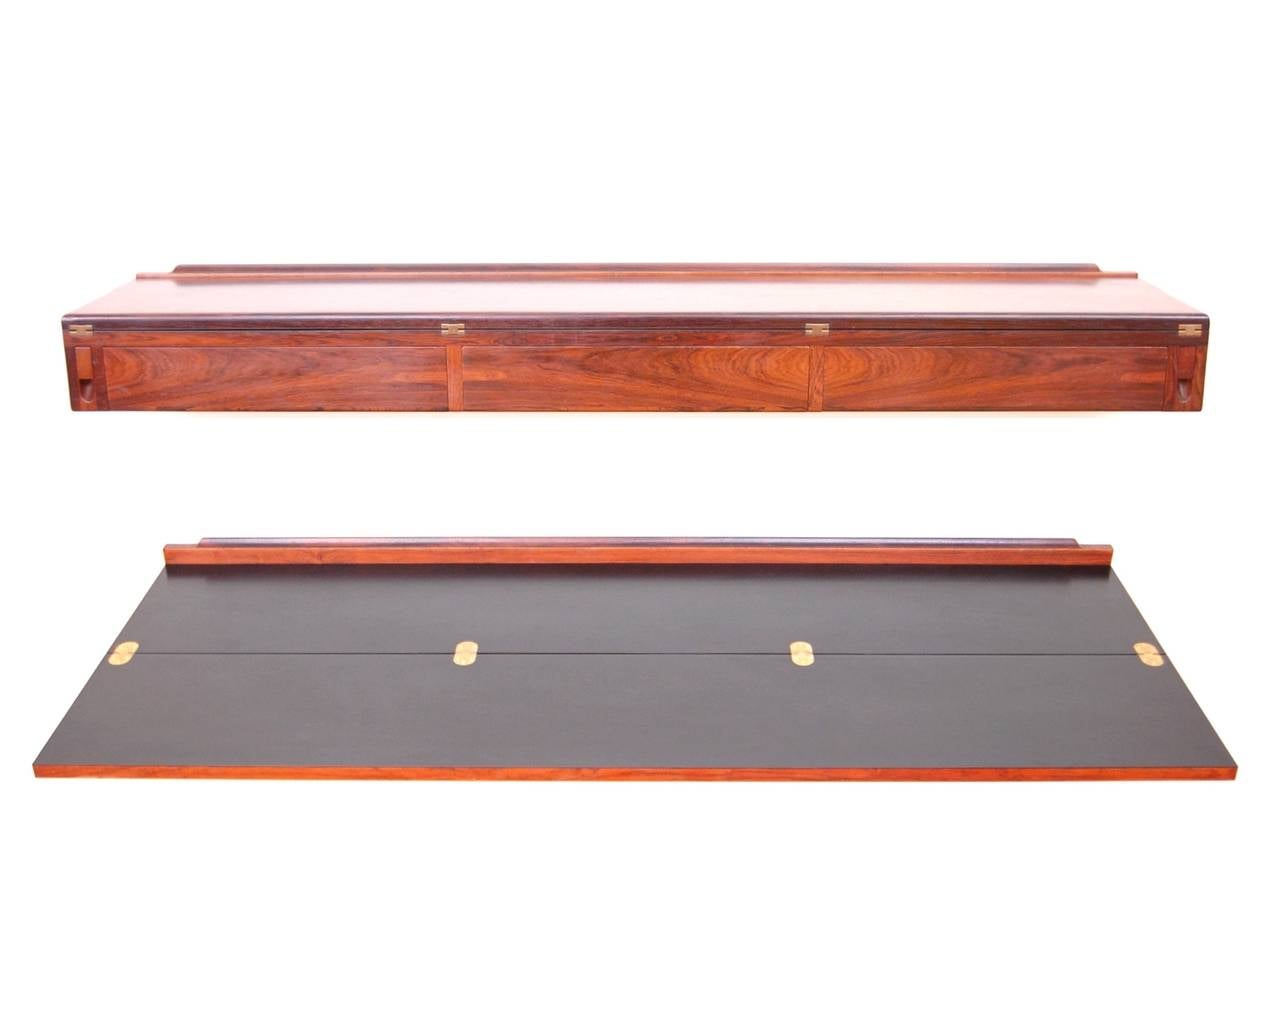 Ingenious wall-mounted desk console in rosewood by Arne Hovmand-Olsen. Console top flips open to reveal a 22 1/2